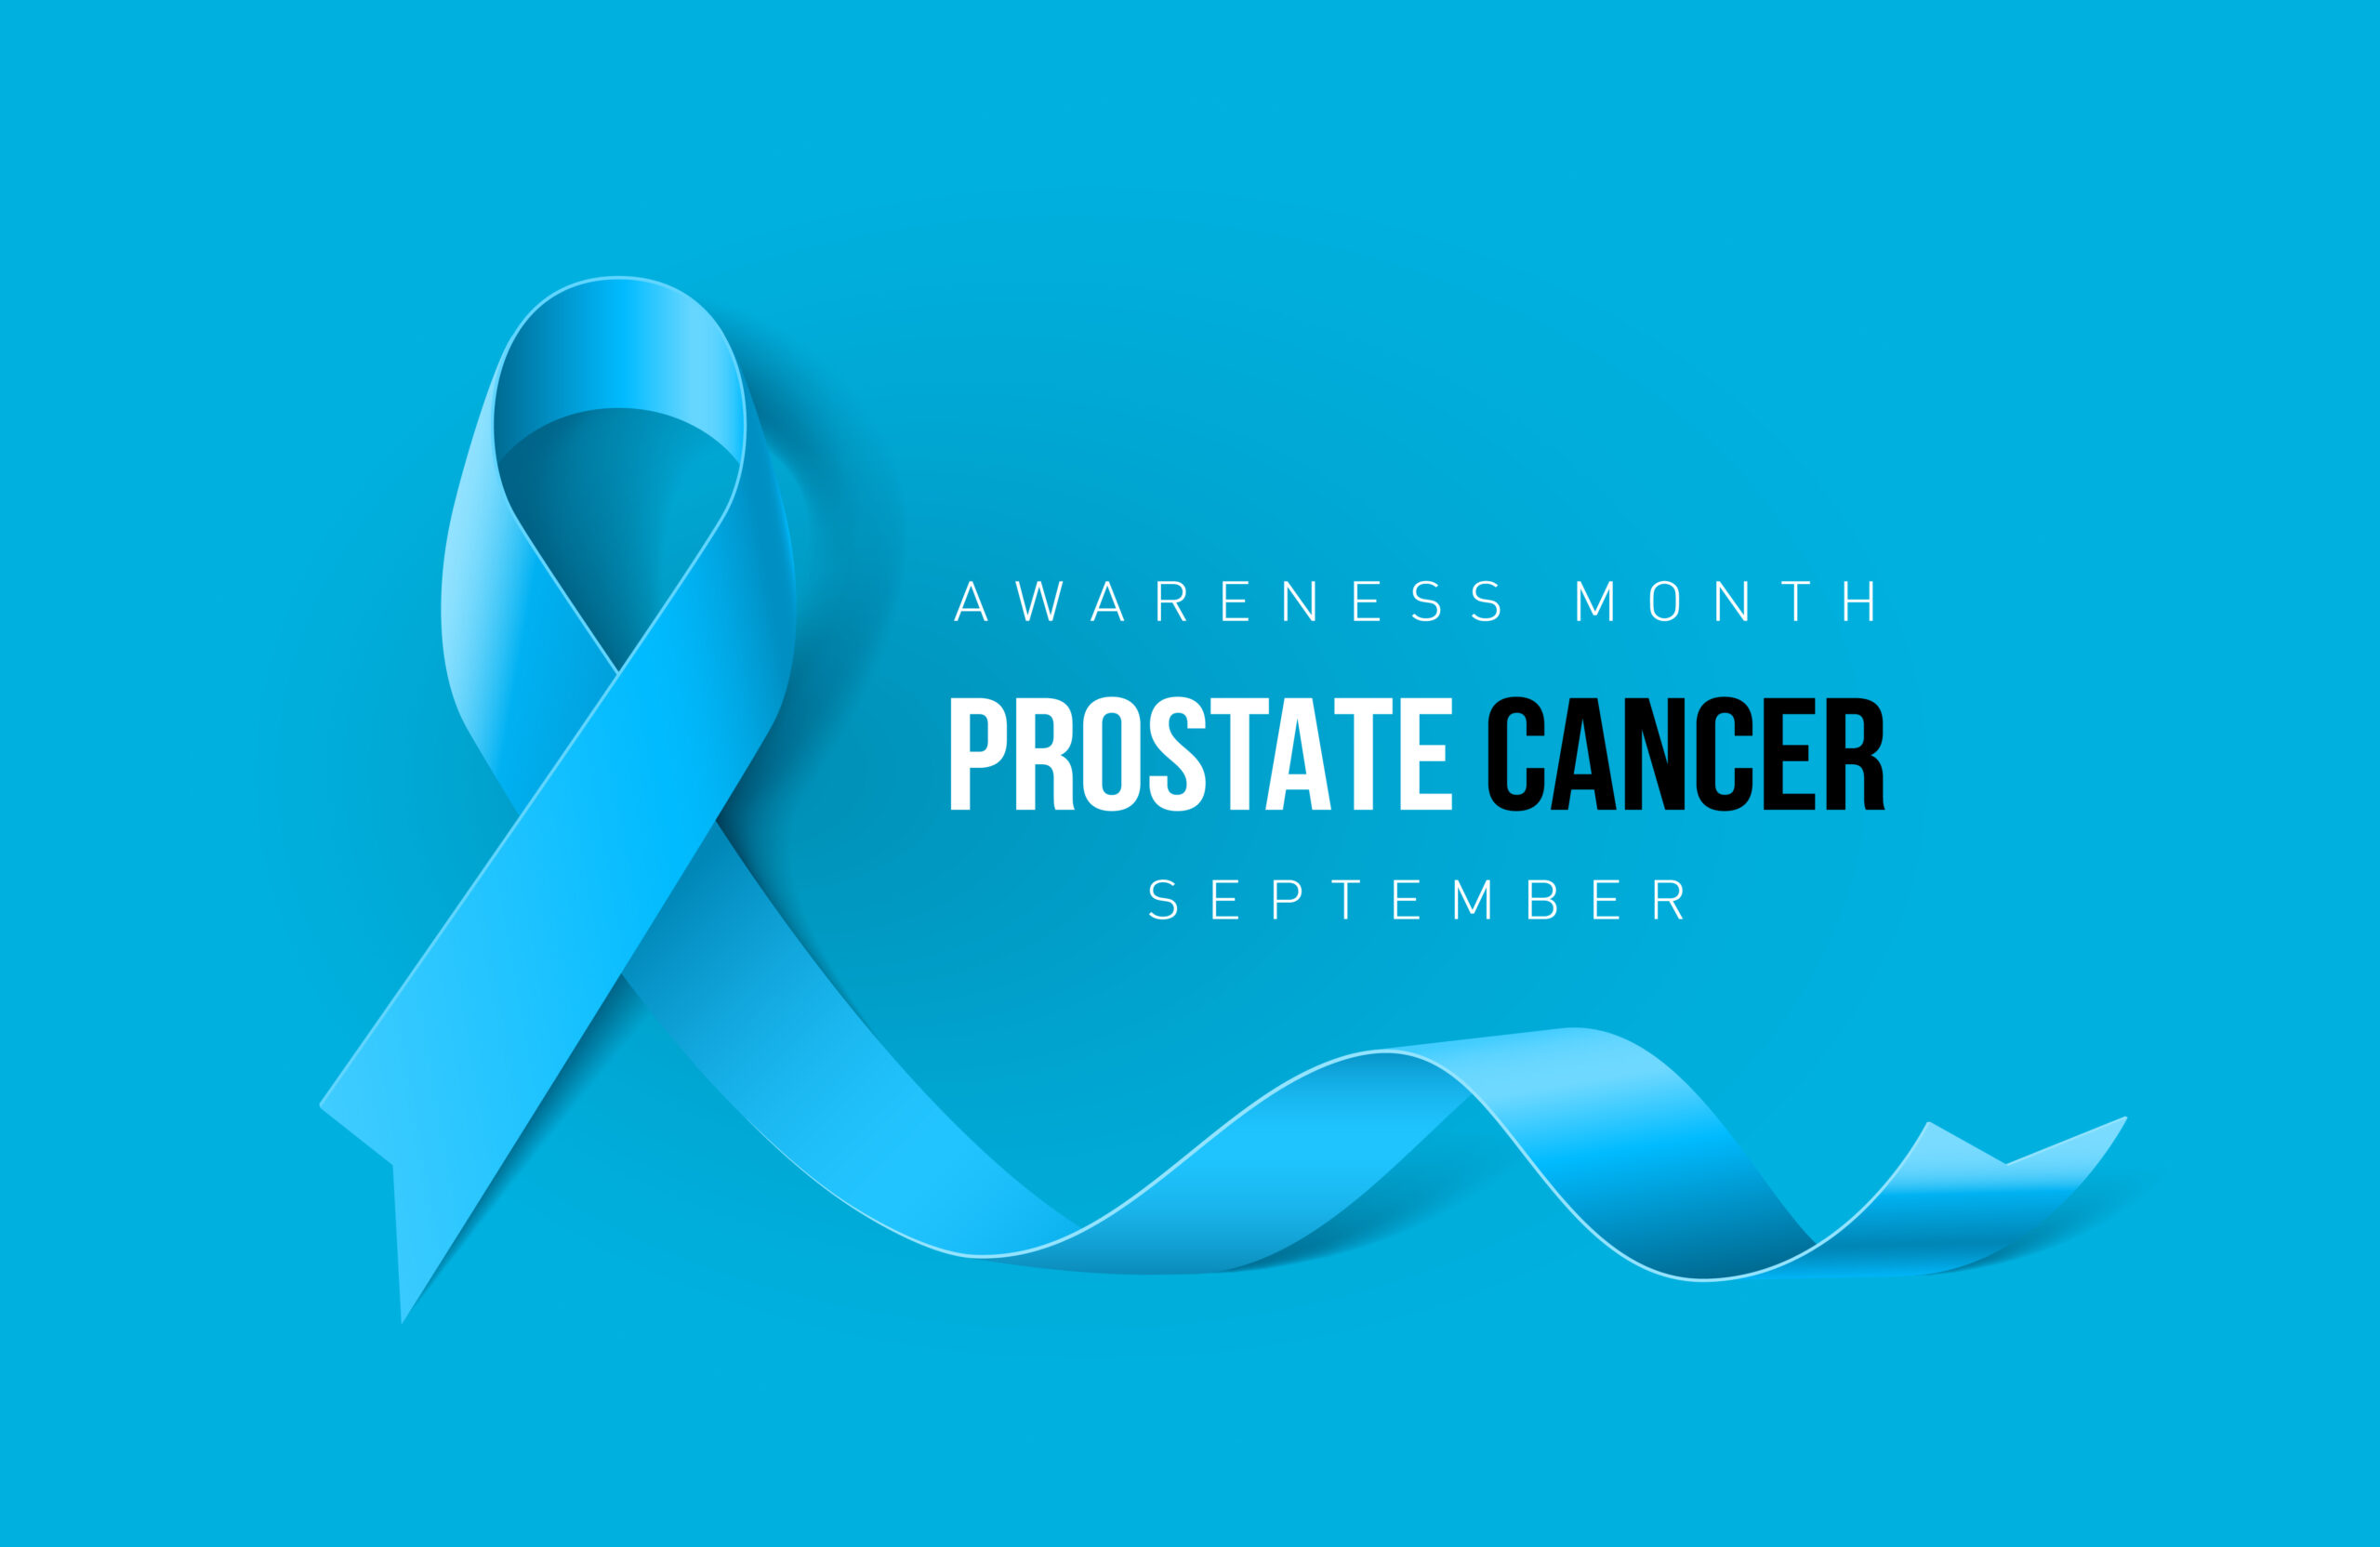  Best hospitals for prostate cancer treatment